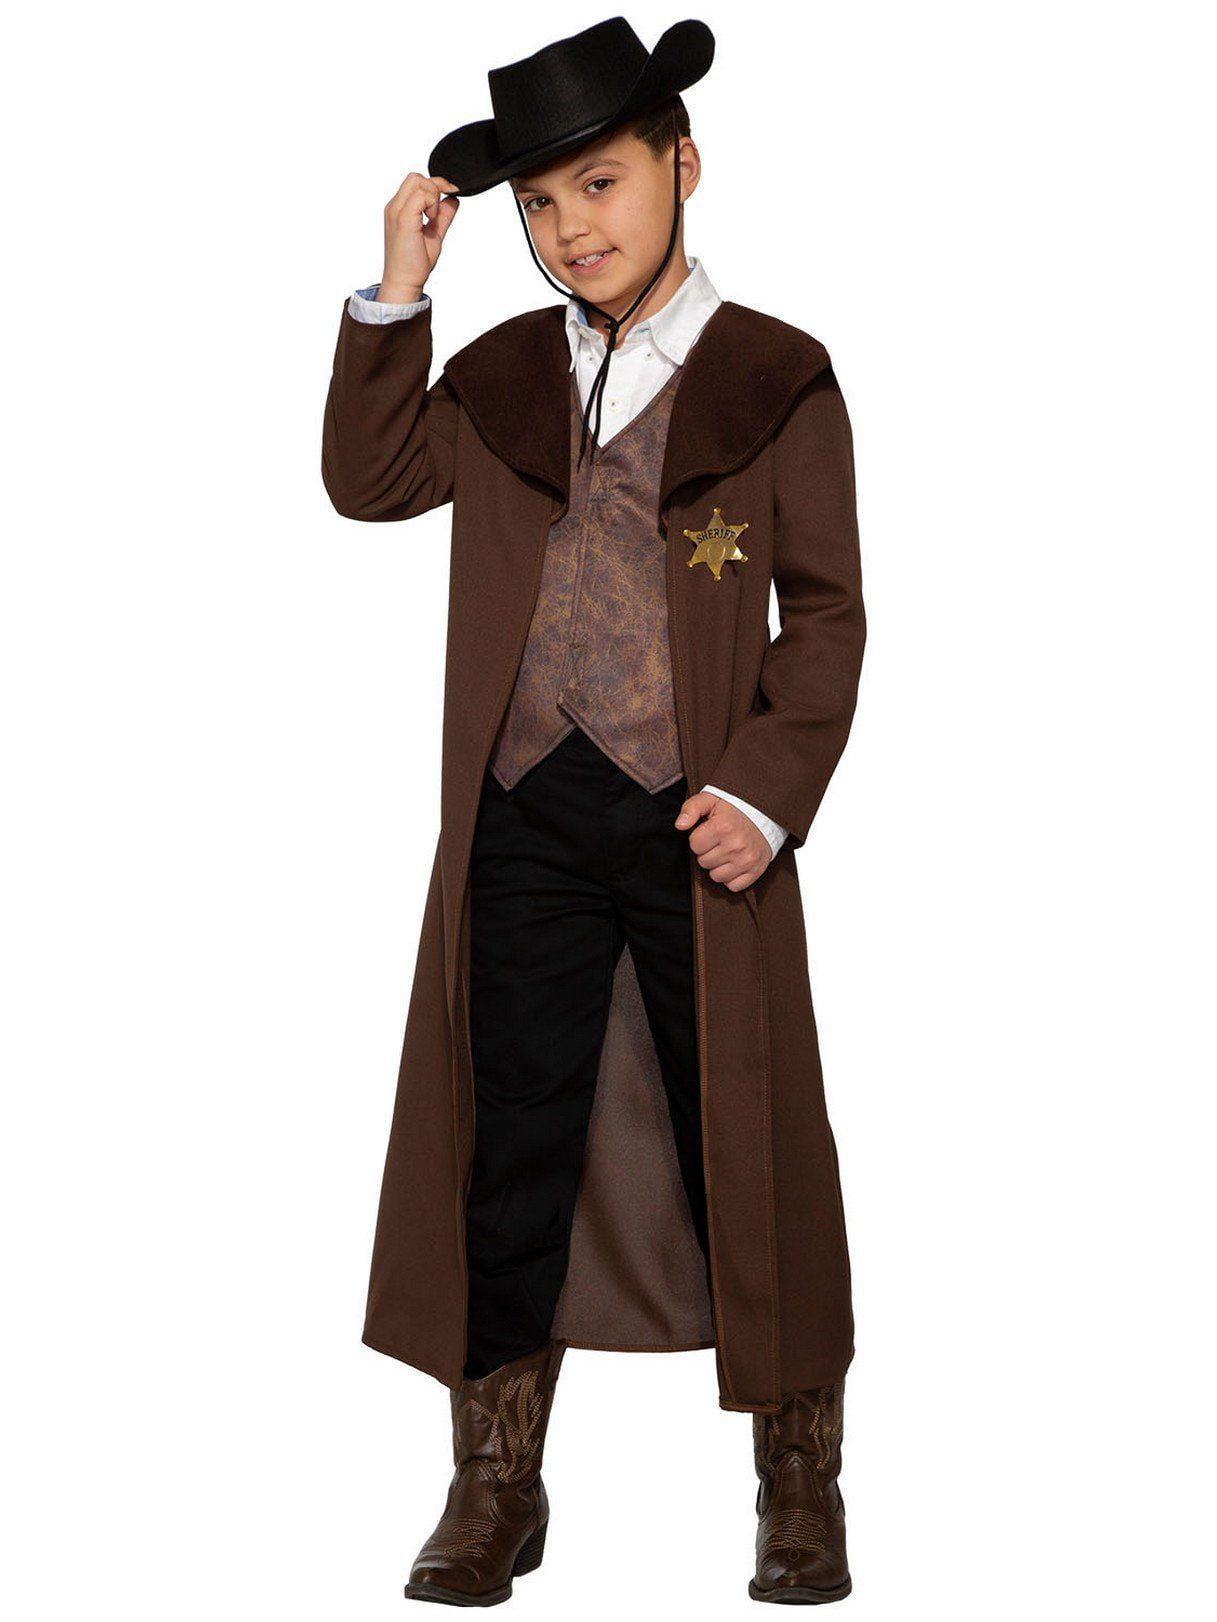 Picture of Forum Novelties 414297 Child New Sheriff in Town Costume for Boys, Small